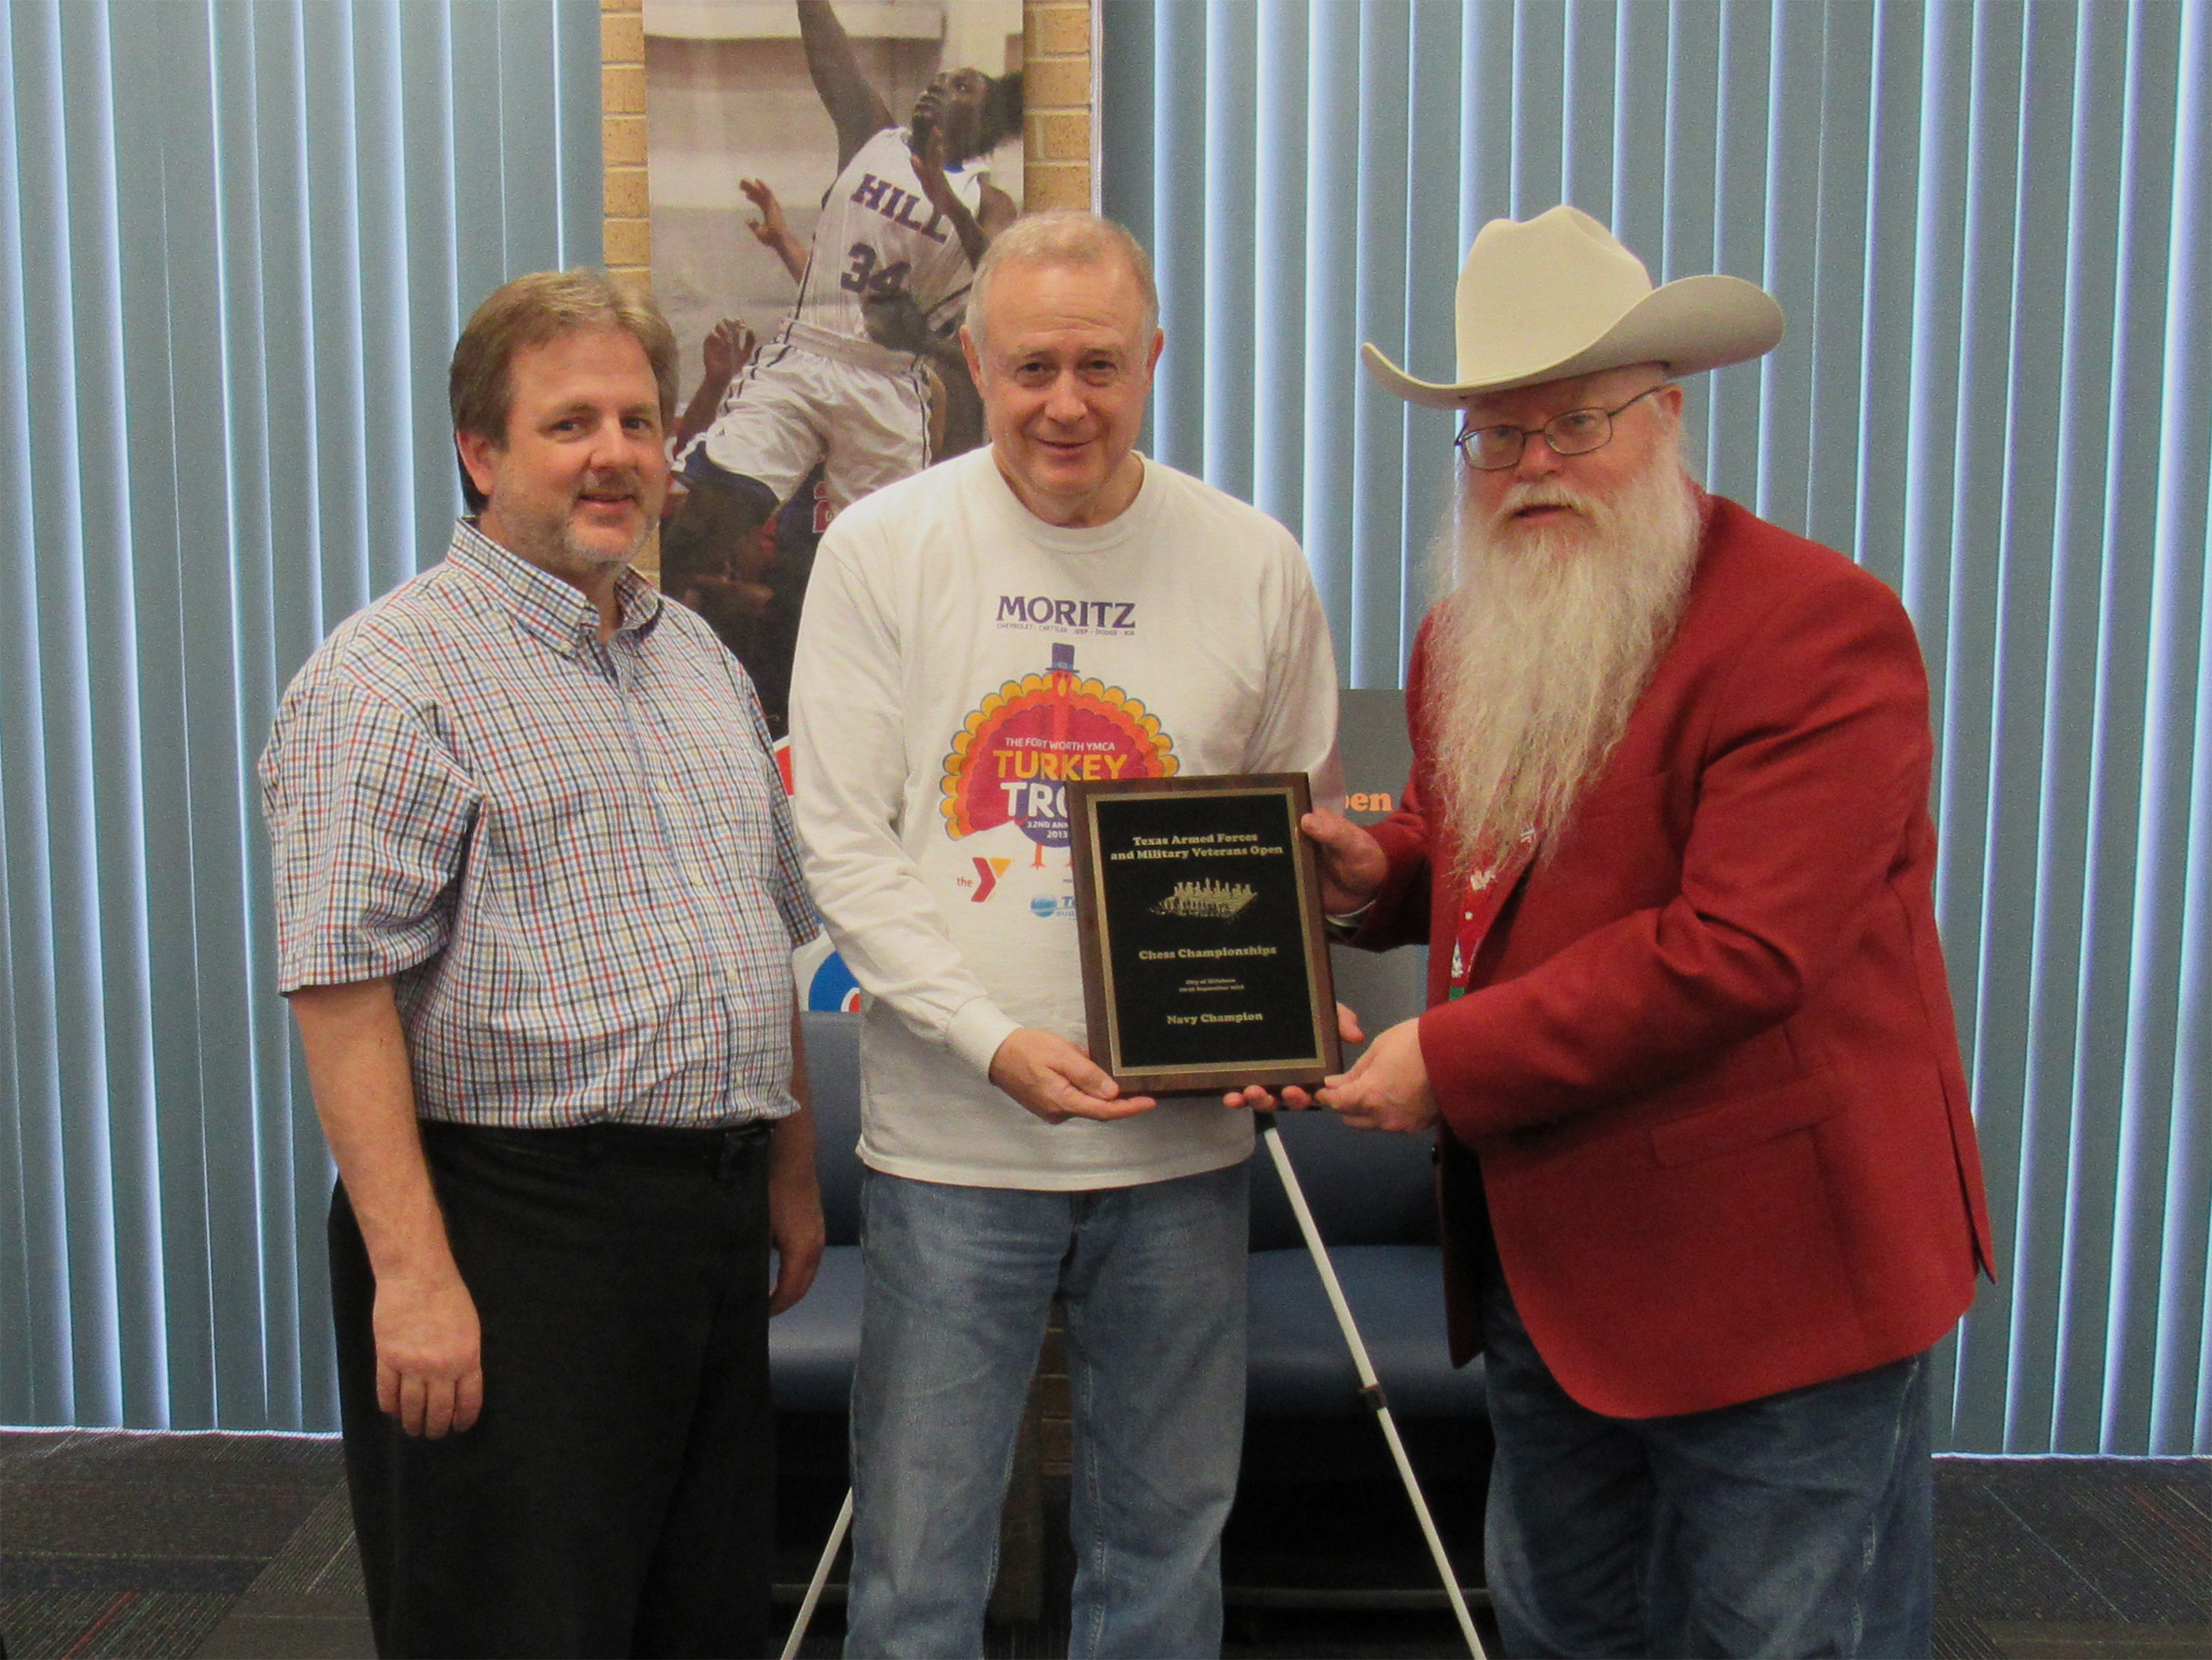 Chief Tournament Director Chris Wood (left) and Chief Organizer Jim Hollingsworth (right) award the title of Texas Armed Forces Navy Champion to Tom Crane (center).  Photo by Sheryl McBroom.